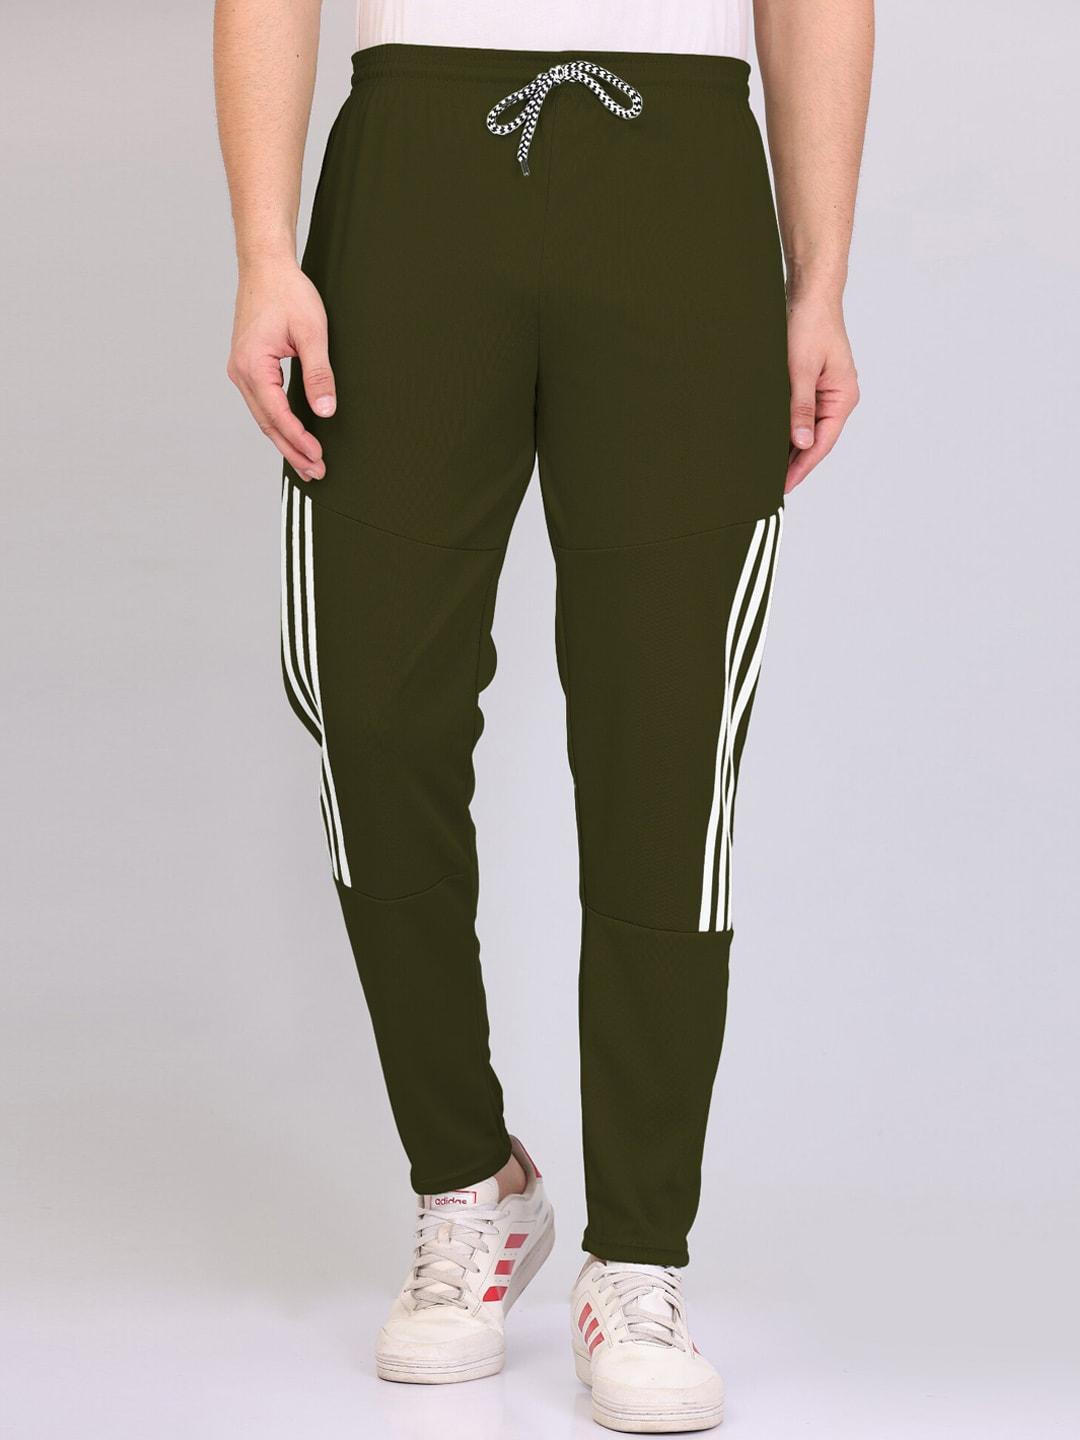 wuxi-men-striped-straight-fit-sports-track-pants